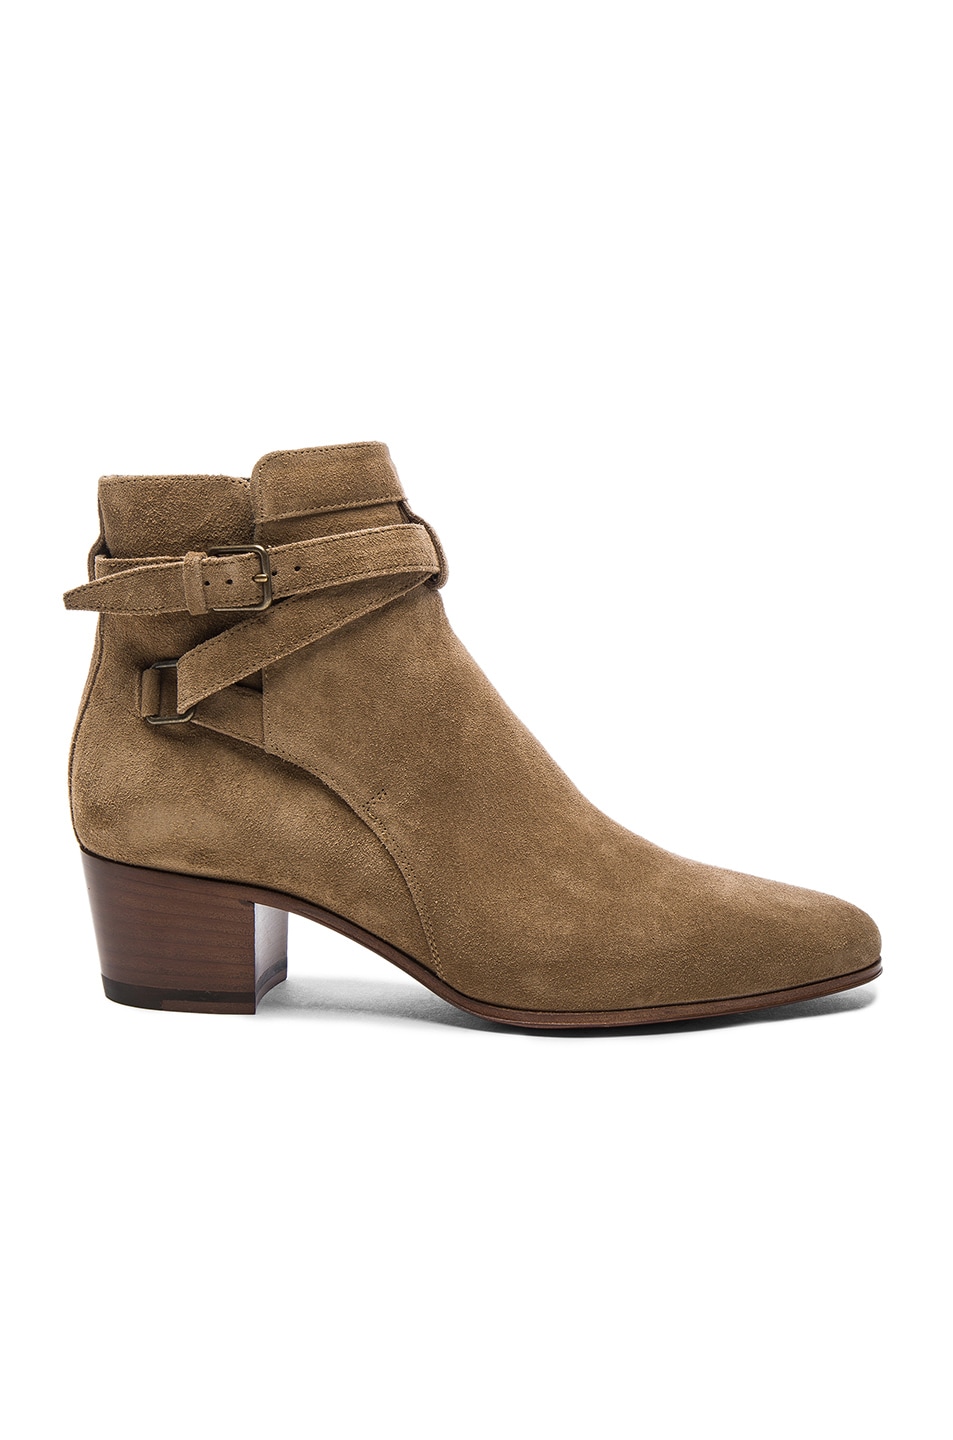 Image 1 of Saint Laurent Suede Blake Boots in Light Cigare